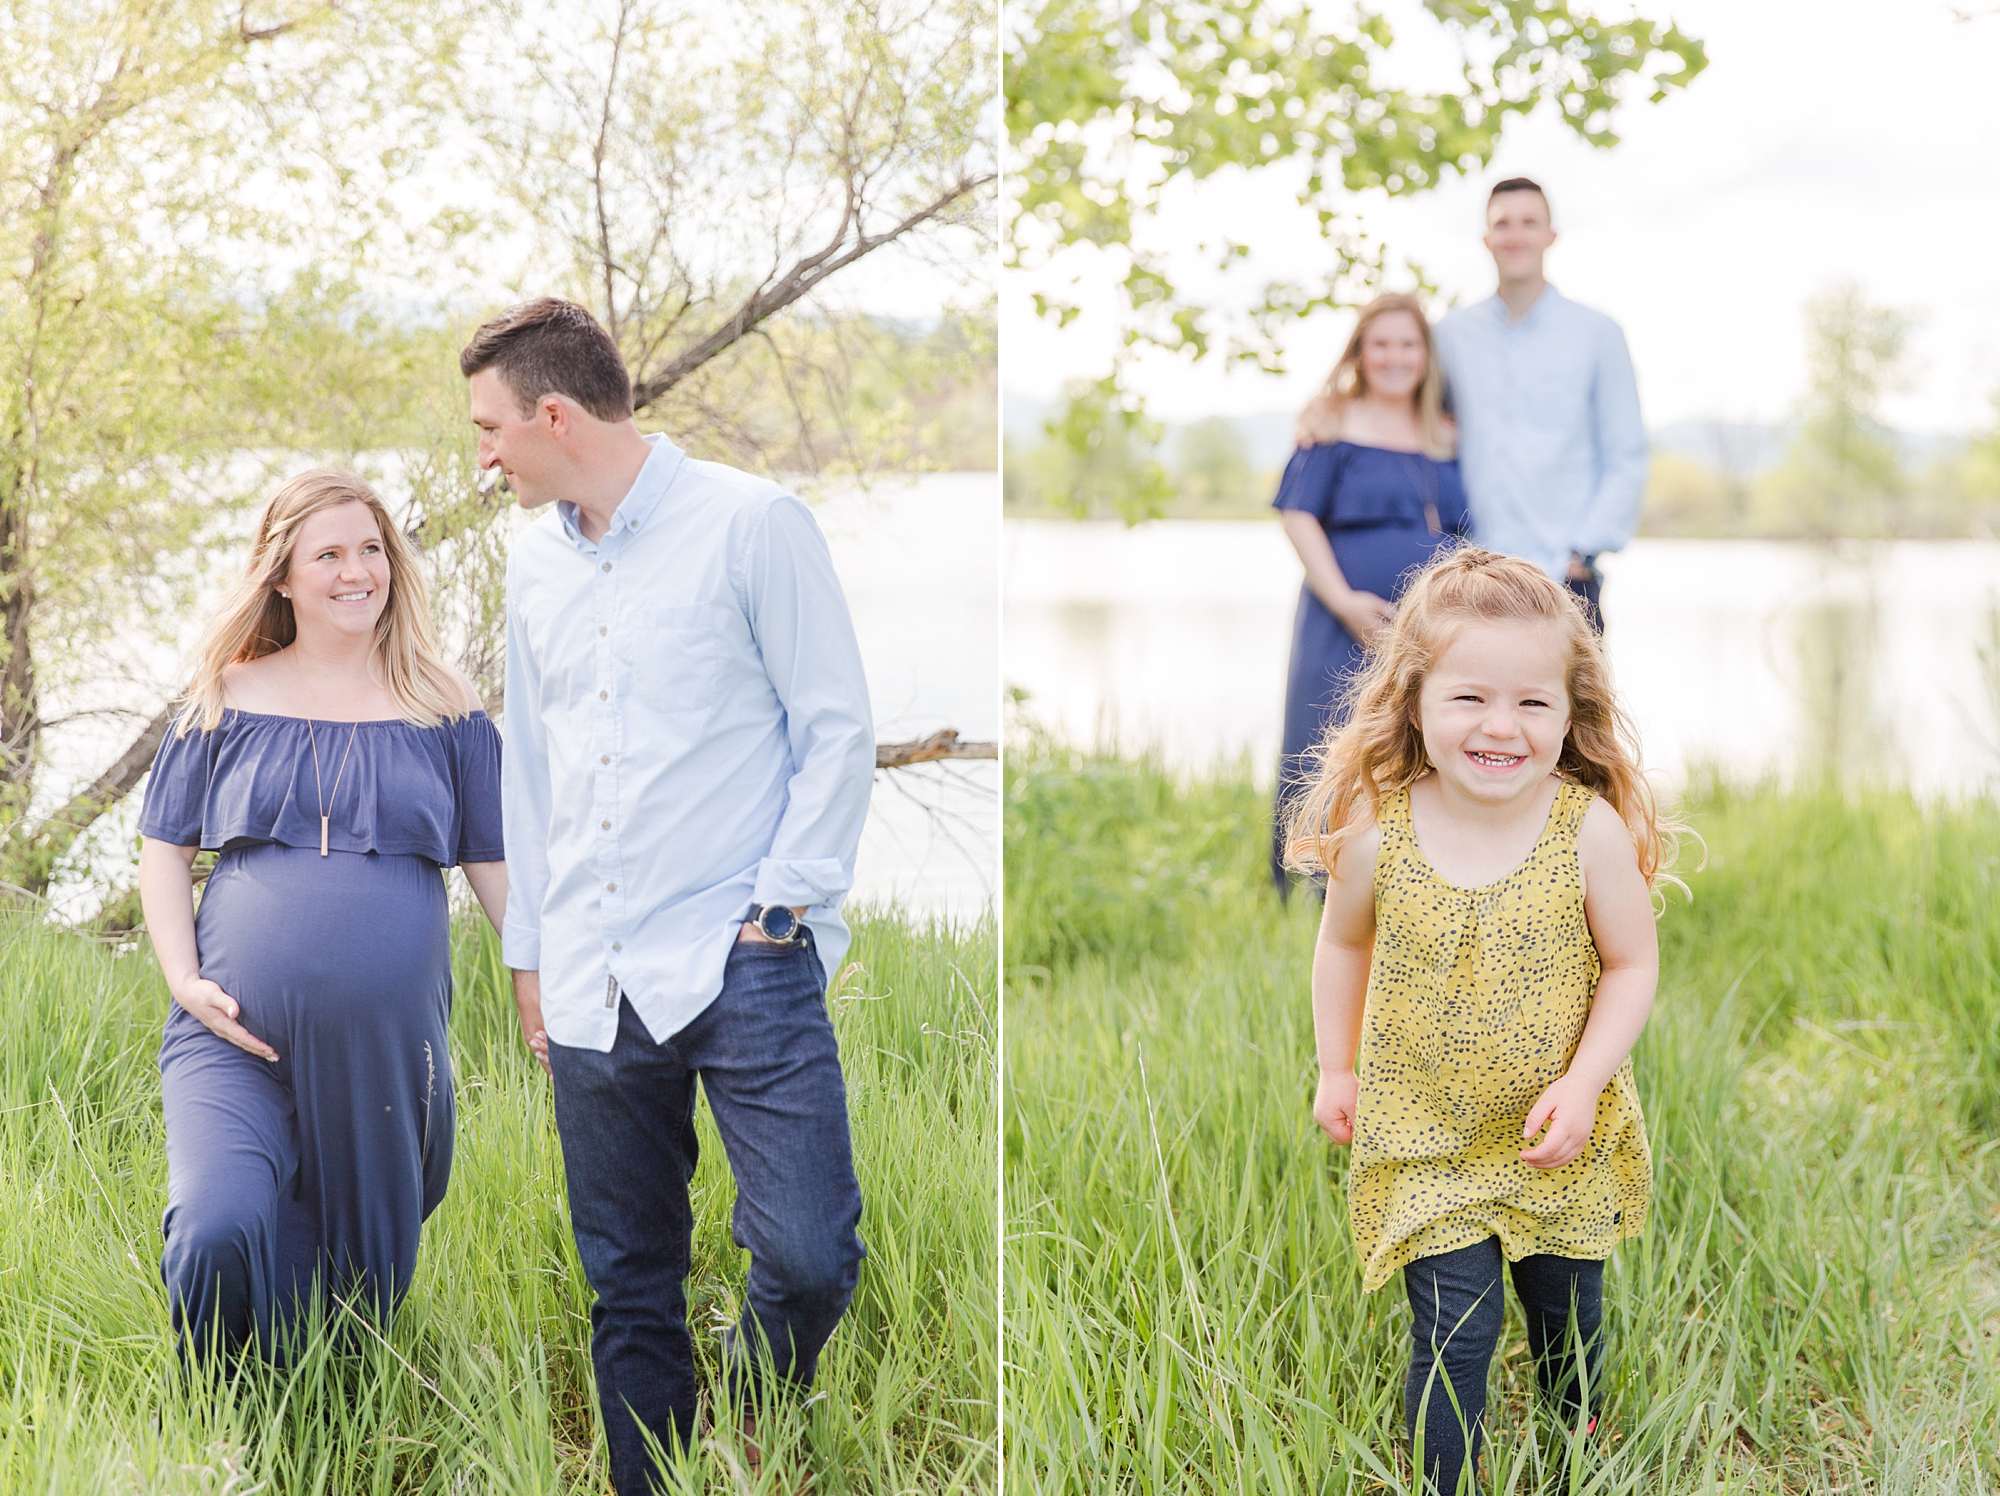 Golden Ponds Maternity session from Northern Colorado Top 10 Locations for Family Photo Sessions